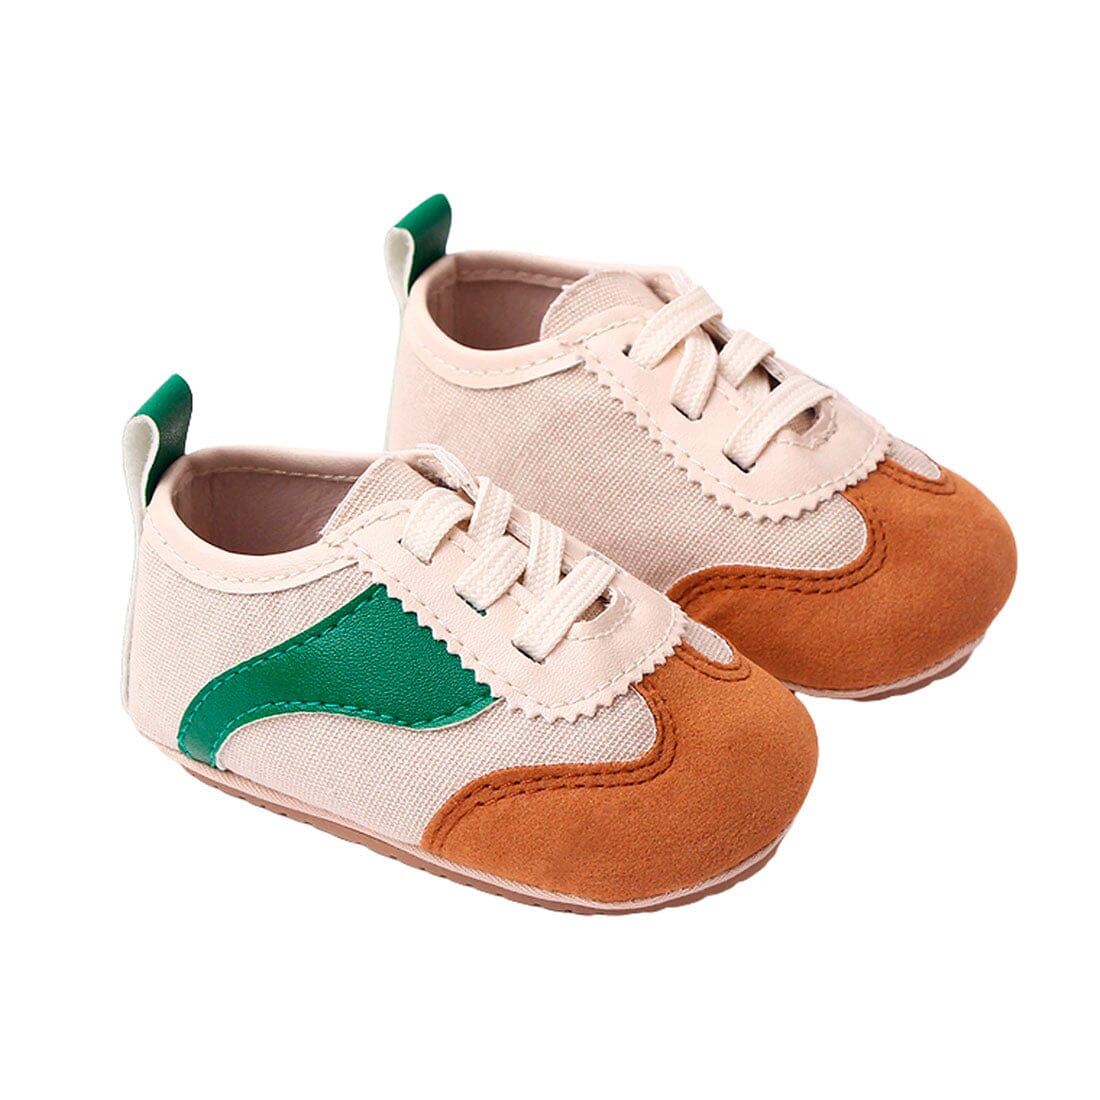 Lace Up Canvas Baby Sneakers Green Brown 1 